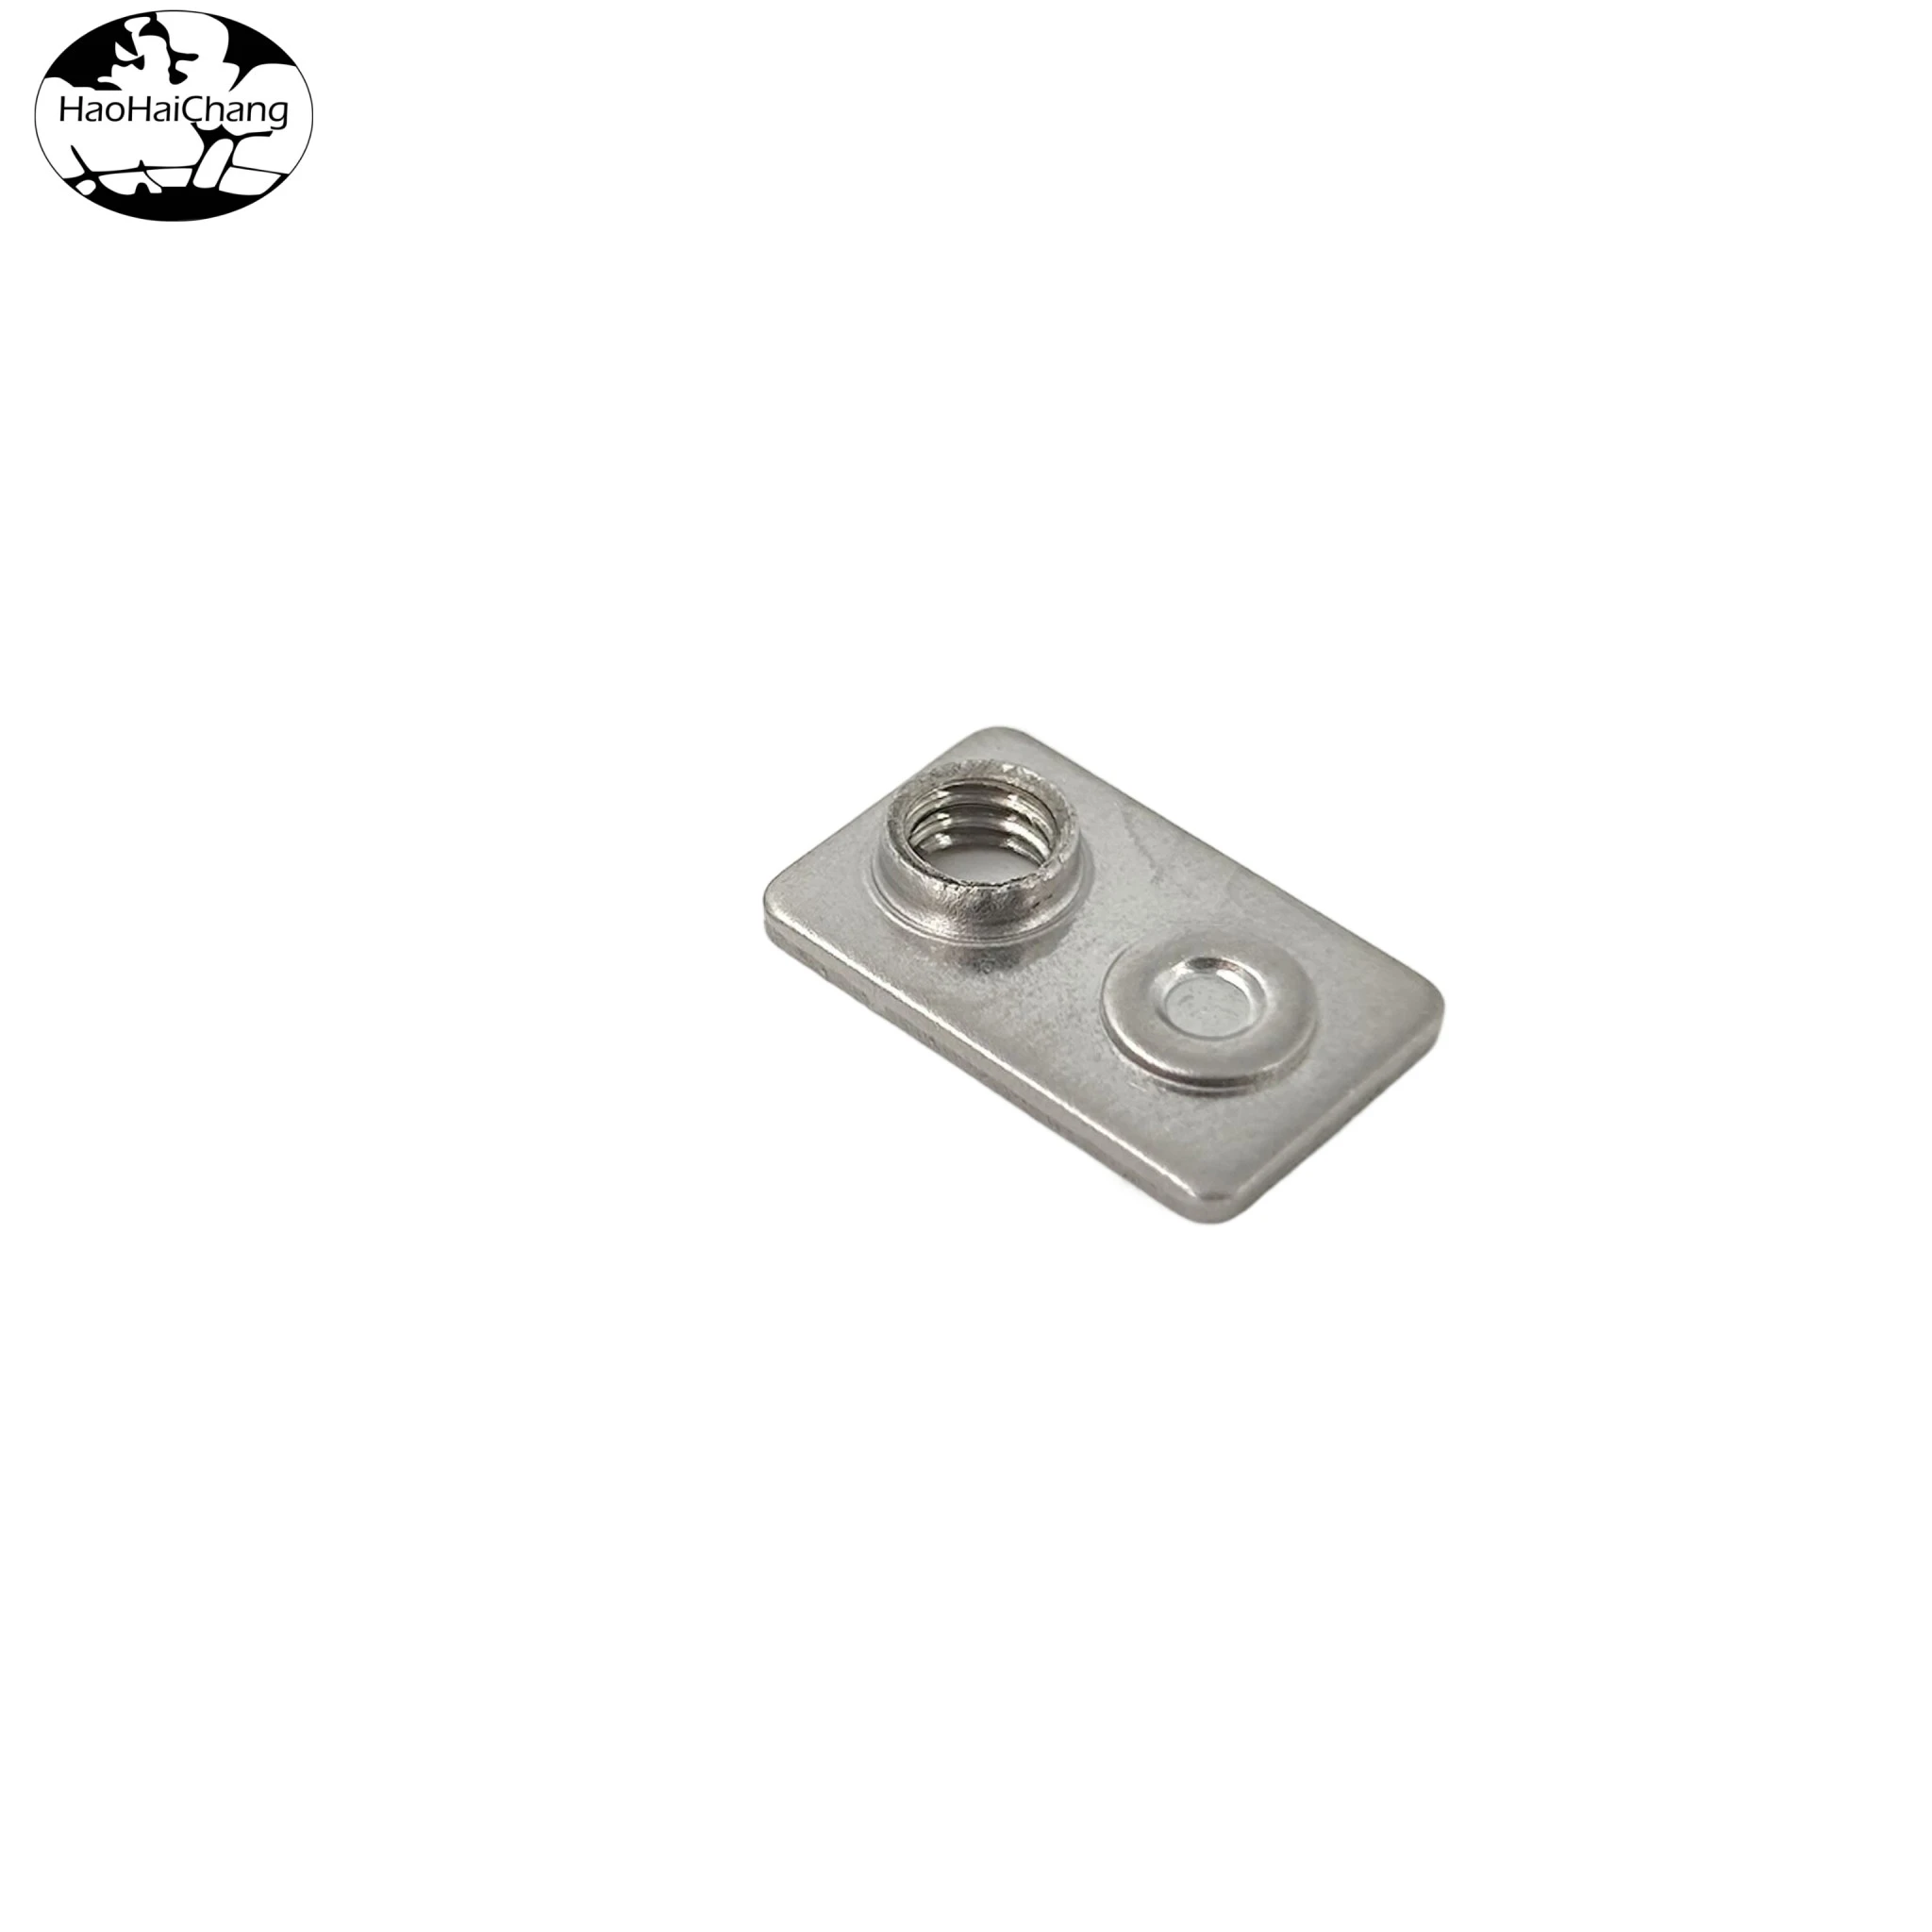 HHC-0343 Connector